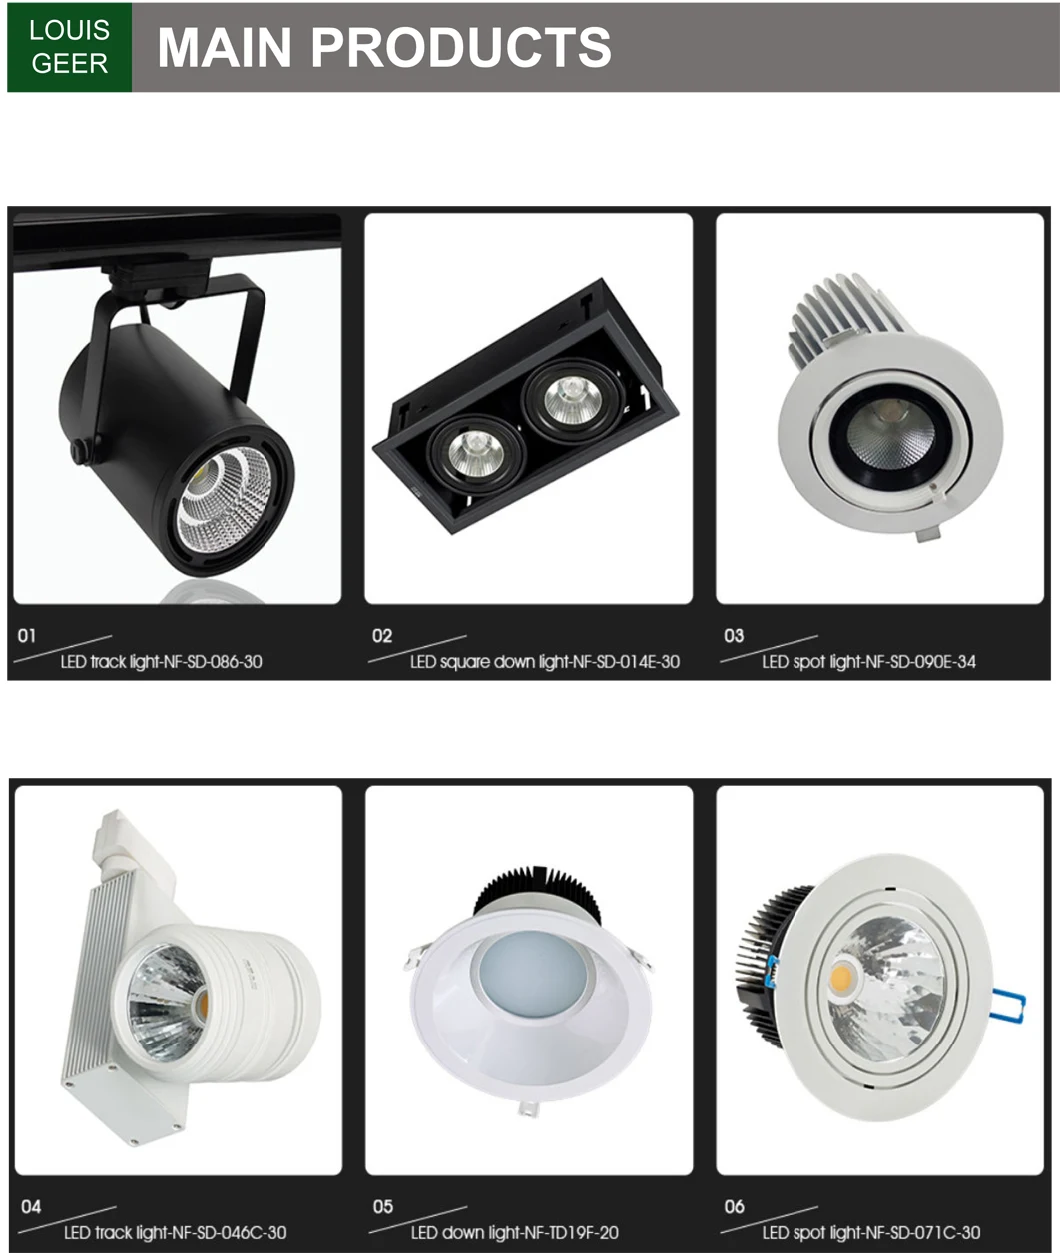 15W Professional Supplier LED Bulb Lamp Customize Dimmable LED Track Light Magnetic Track Light